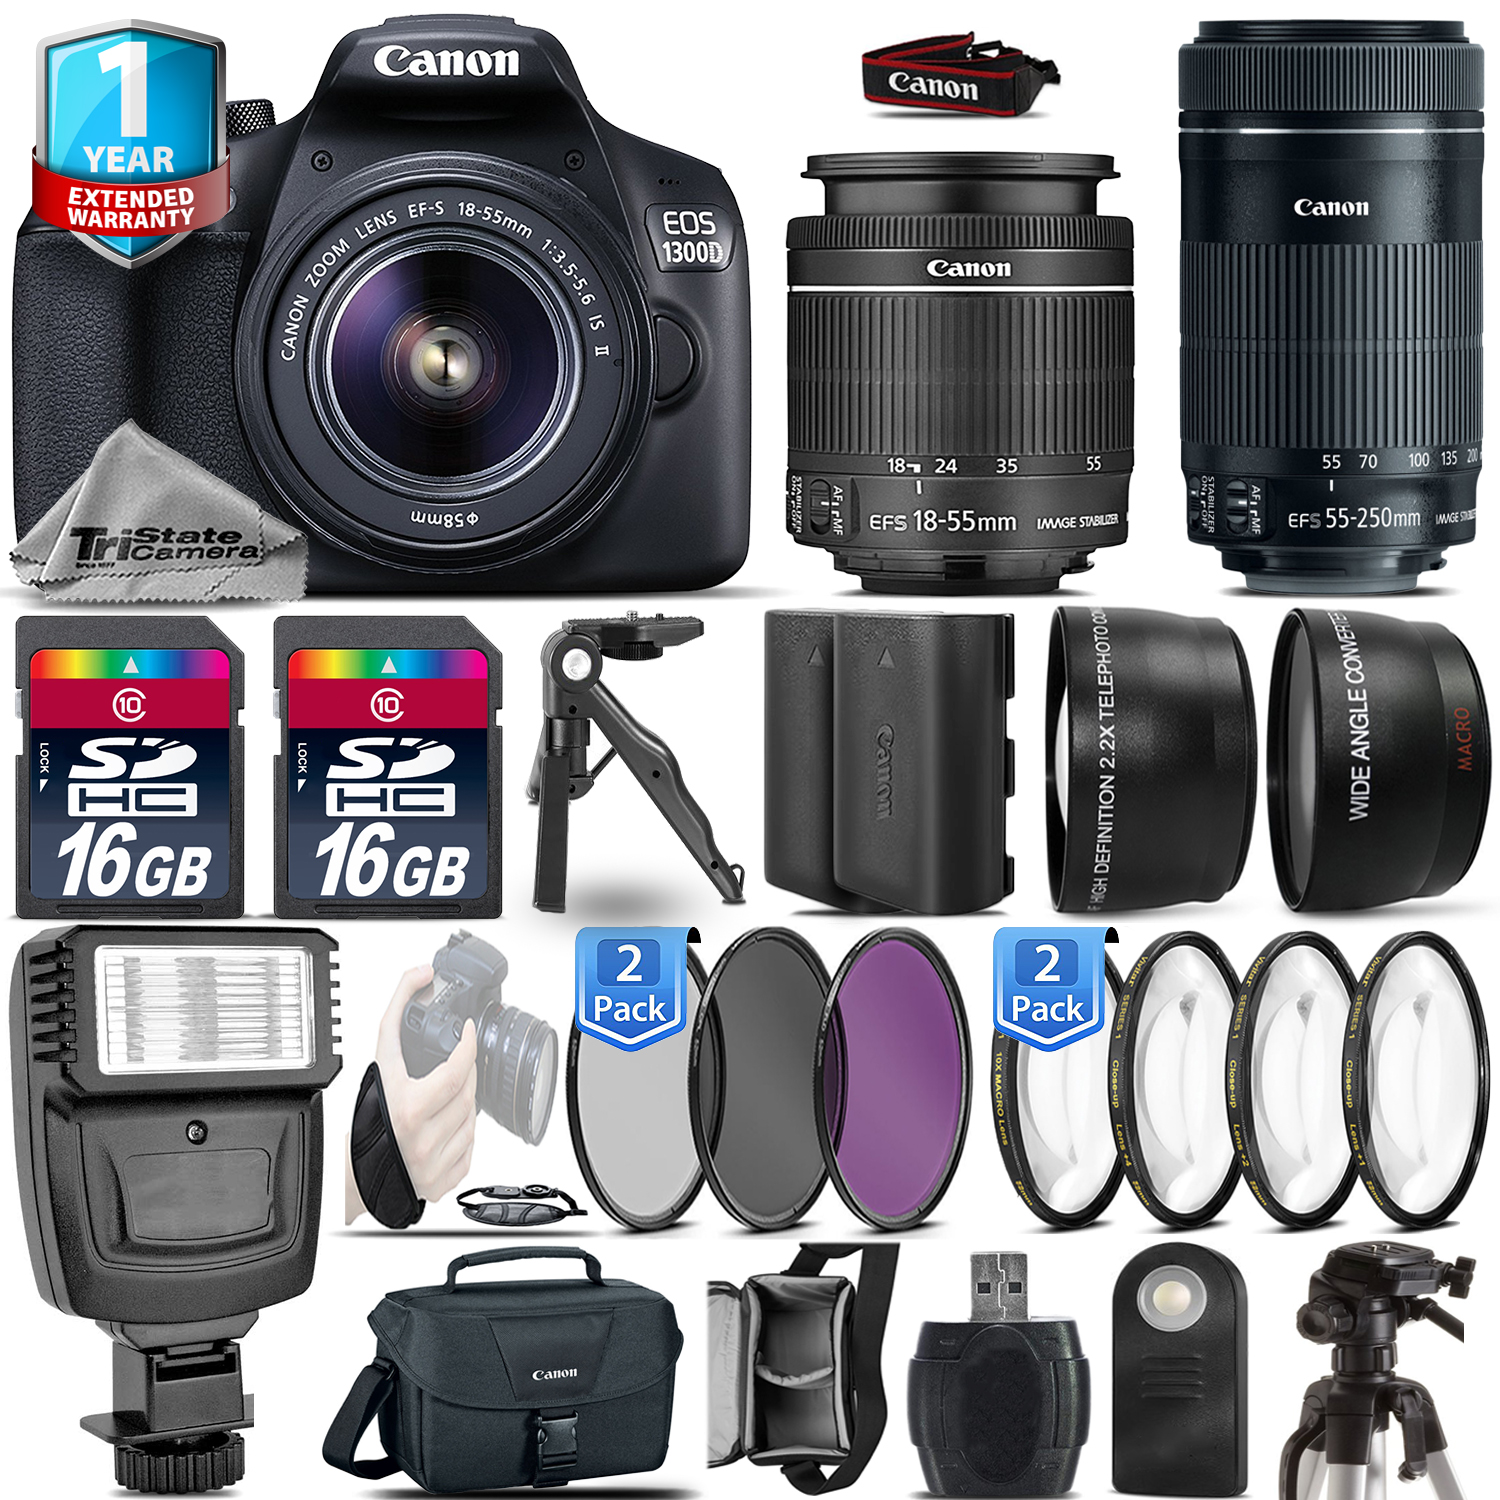 EOS Rebel 1300D Camera + 18-55mm IS + 55-200mm IS + EXT BAT + 1yr Warranty *FREE SHIPPING*